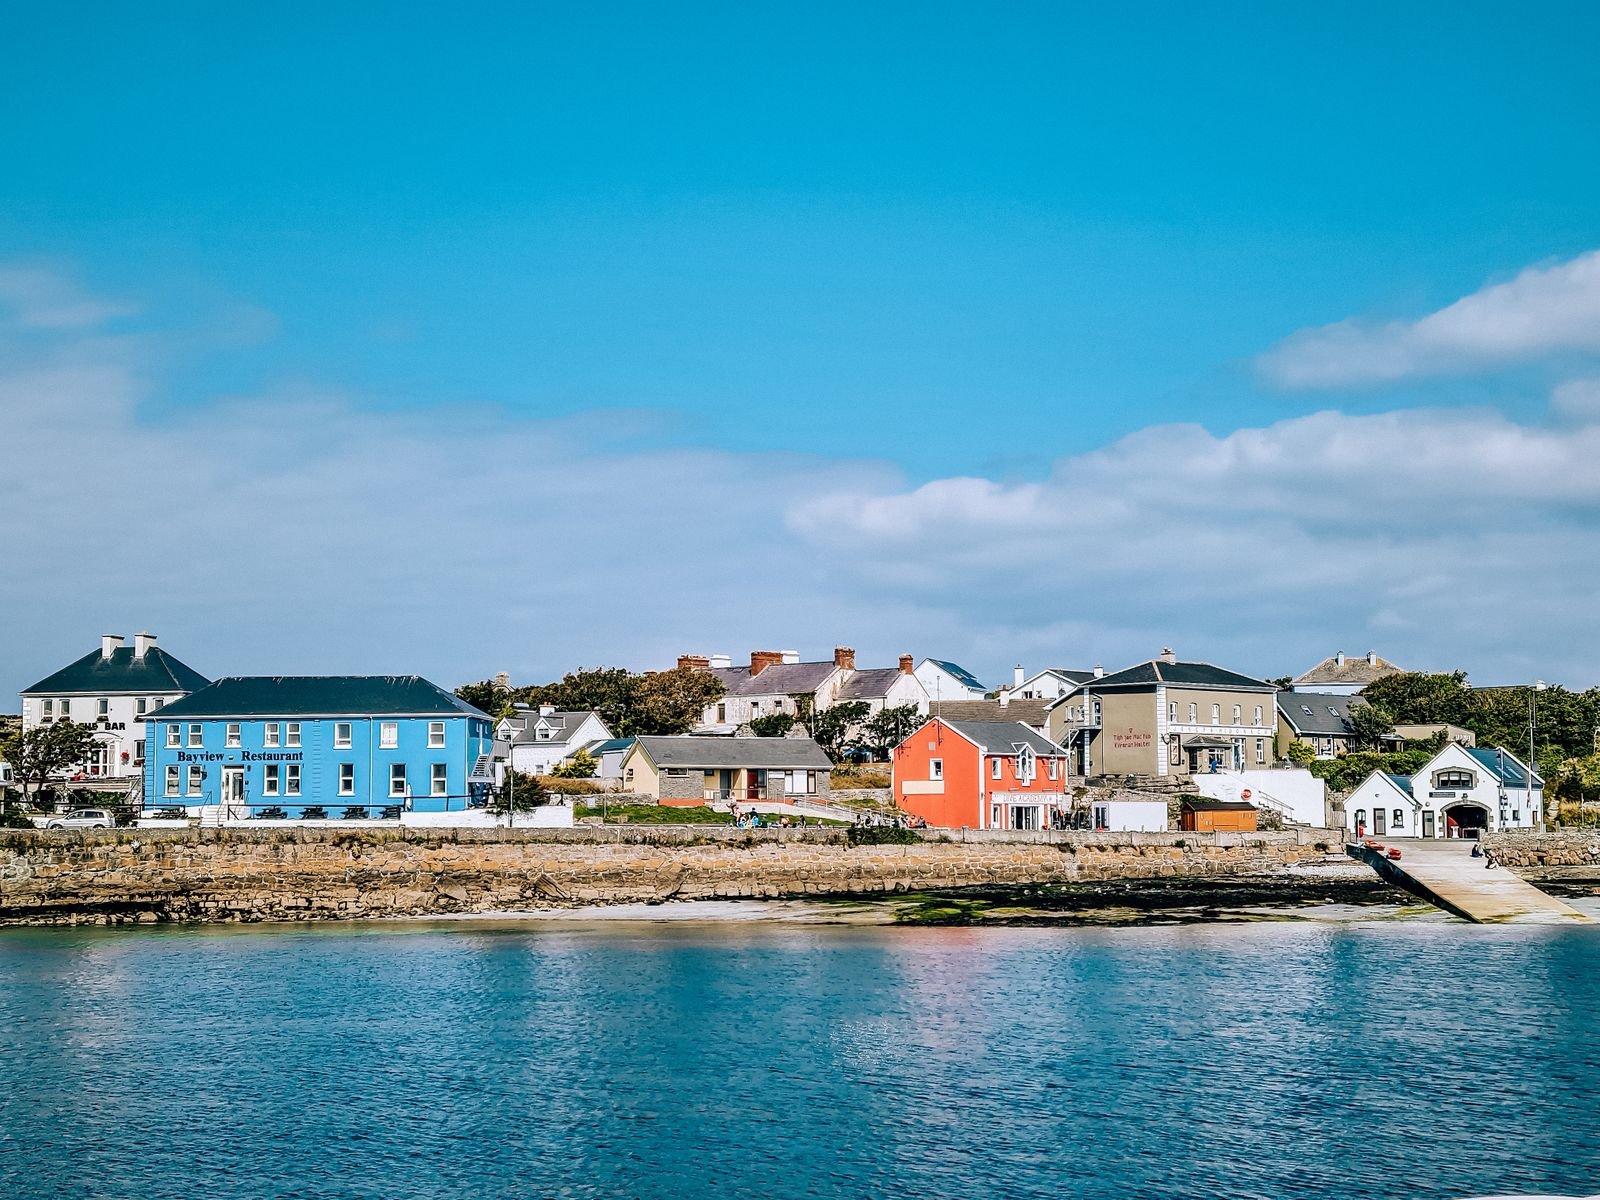 view from the water of the colourful houses on Inishmore island in the Aran Islands